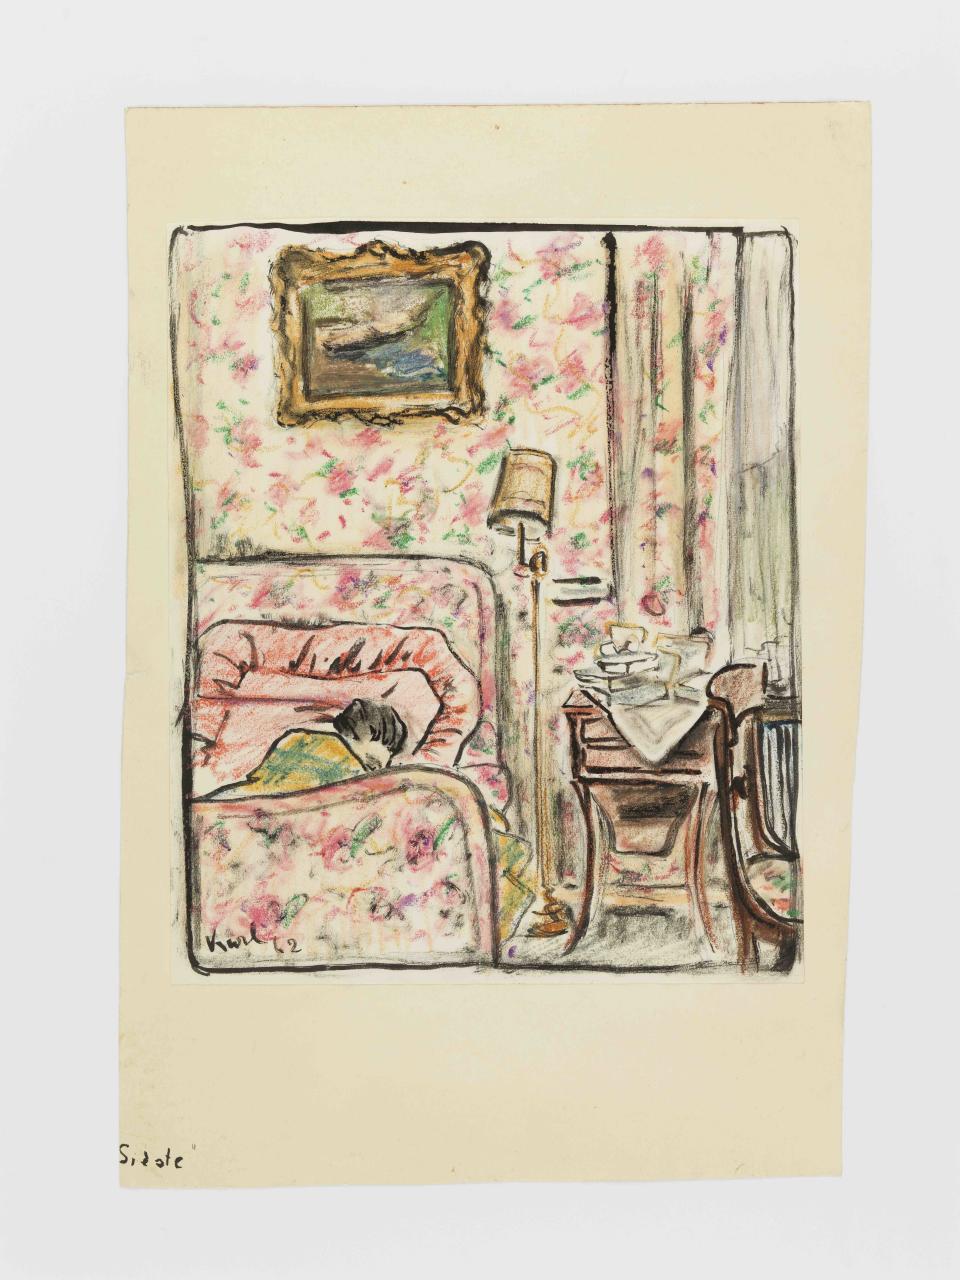 The earliest known drawing by Karl Lagerfeld, from 1942, a napping self-portrait at age nine, his bedside table crowded with books.